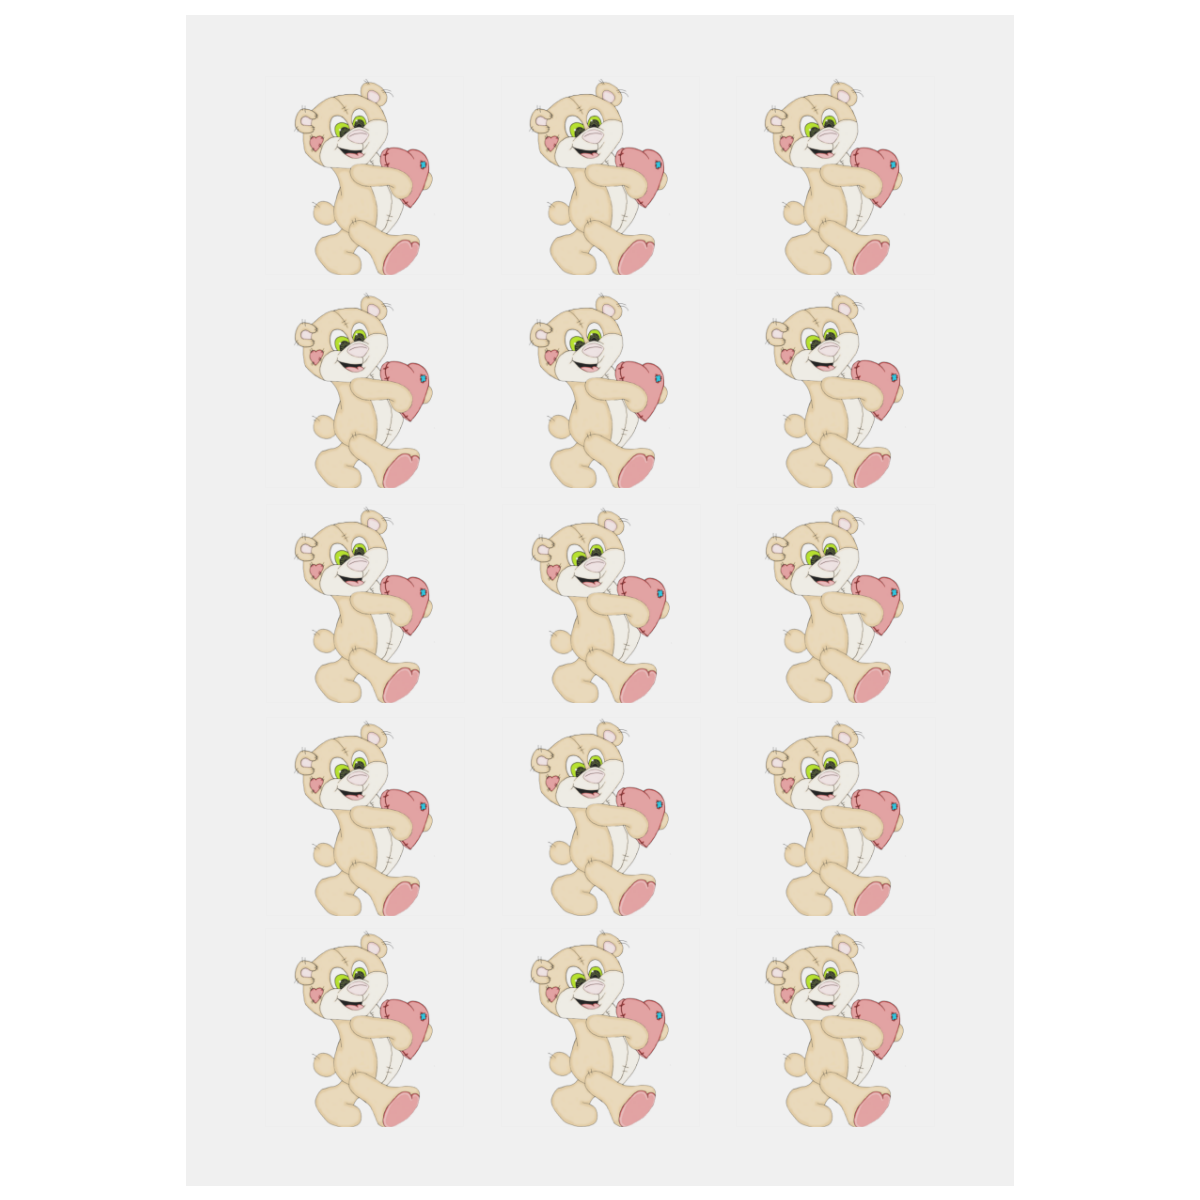 Patchwork Heart Teddy Personalized Temporary Tattoo (15 Pieces)